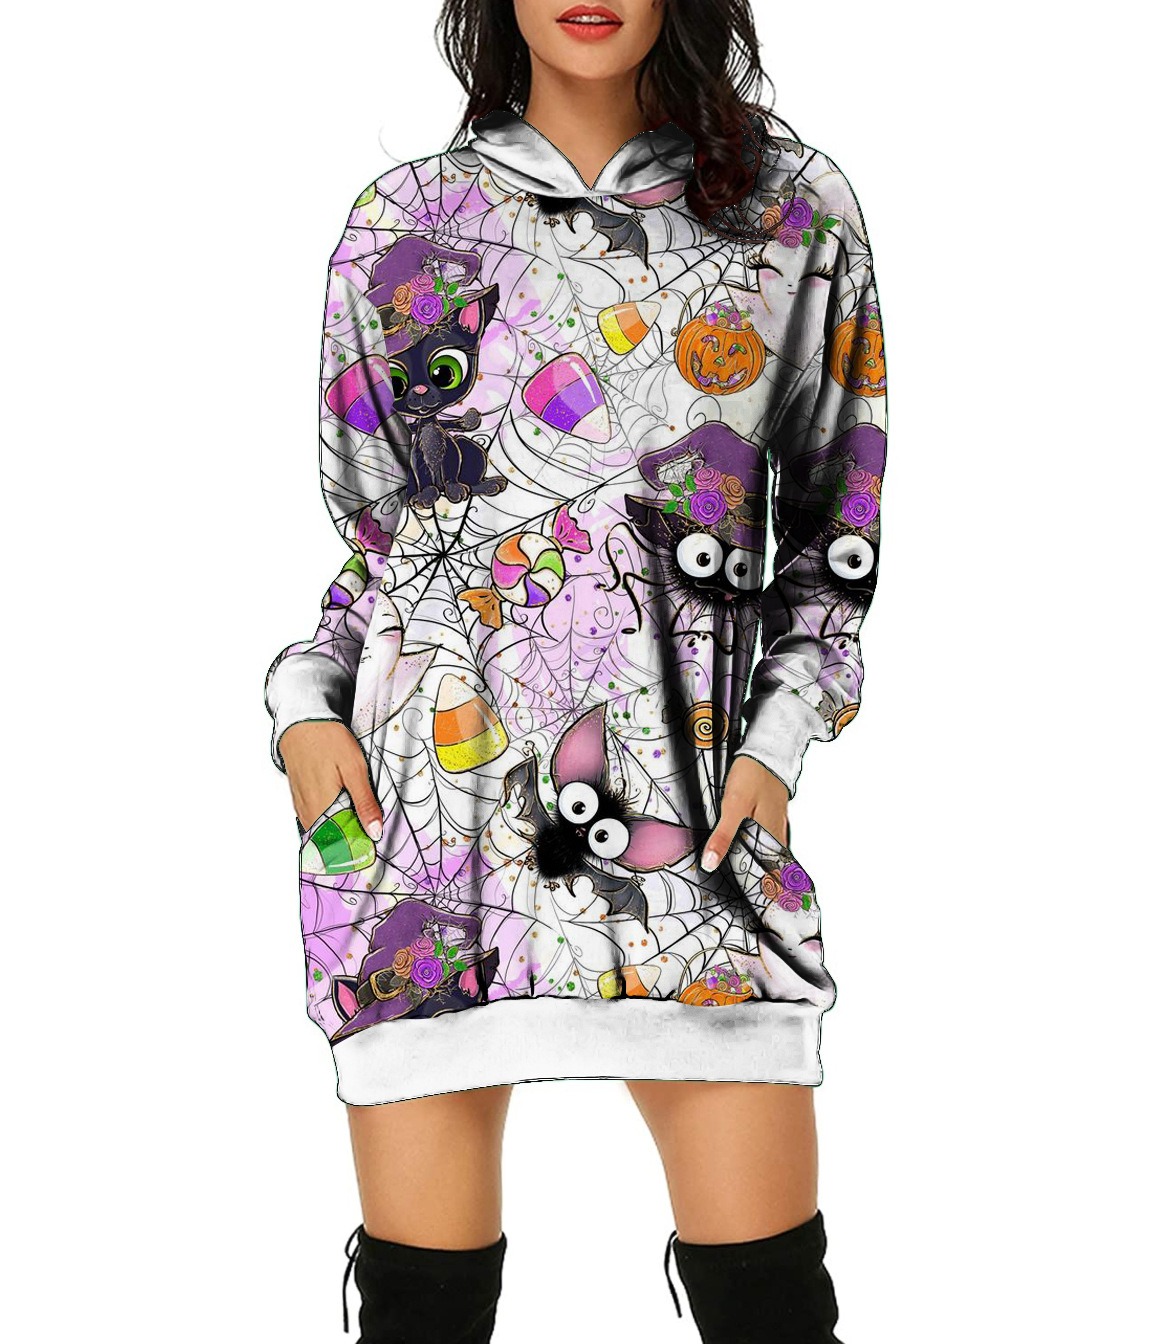 New Autumn and Winter Sweater Halloween 3D Print Loose Top Long Sleeve Hooded Pullover Sweater